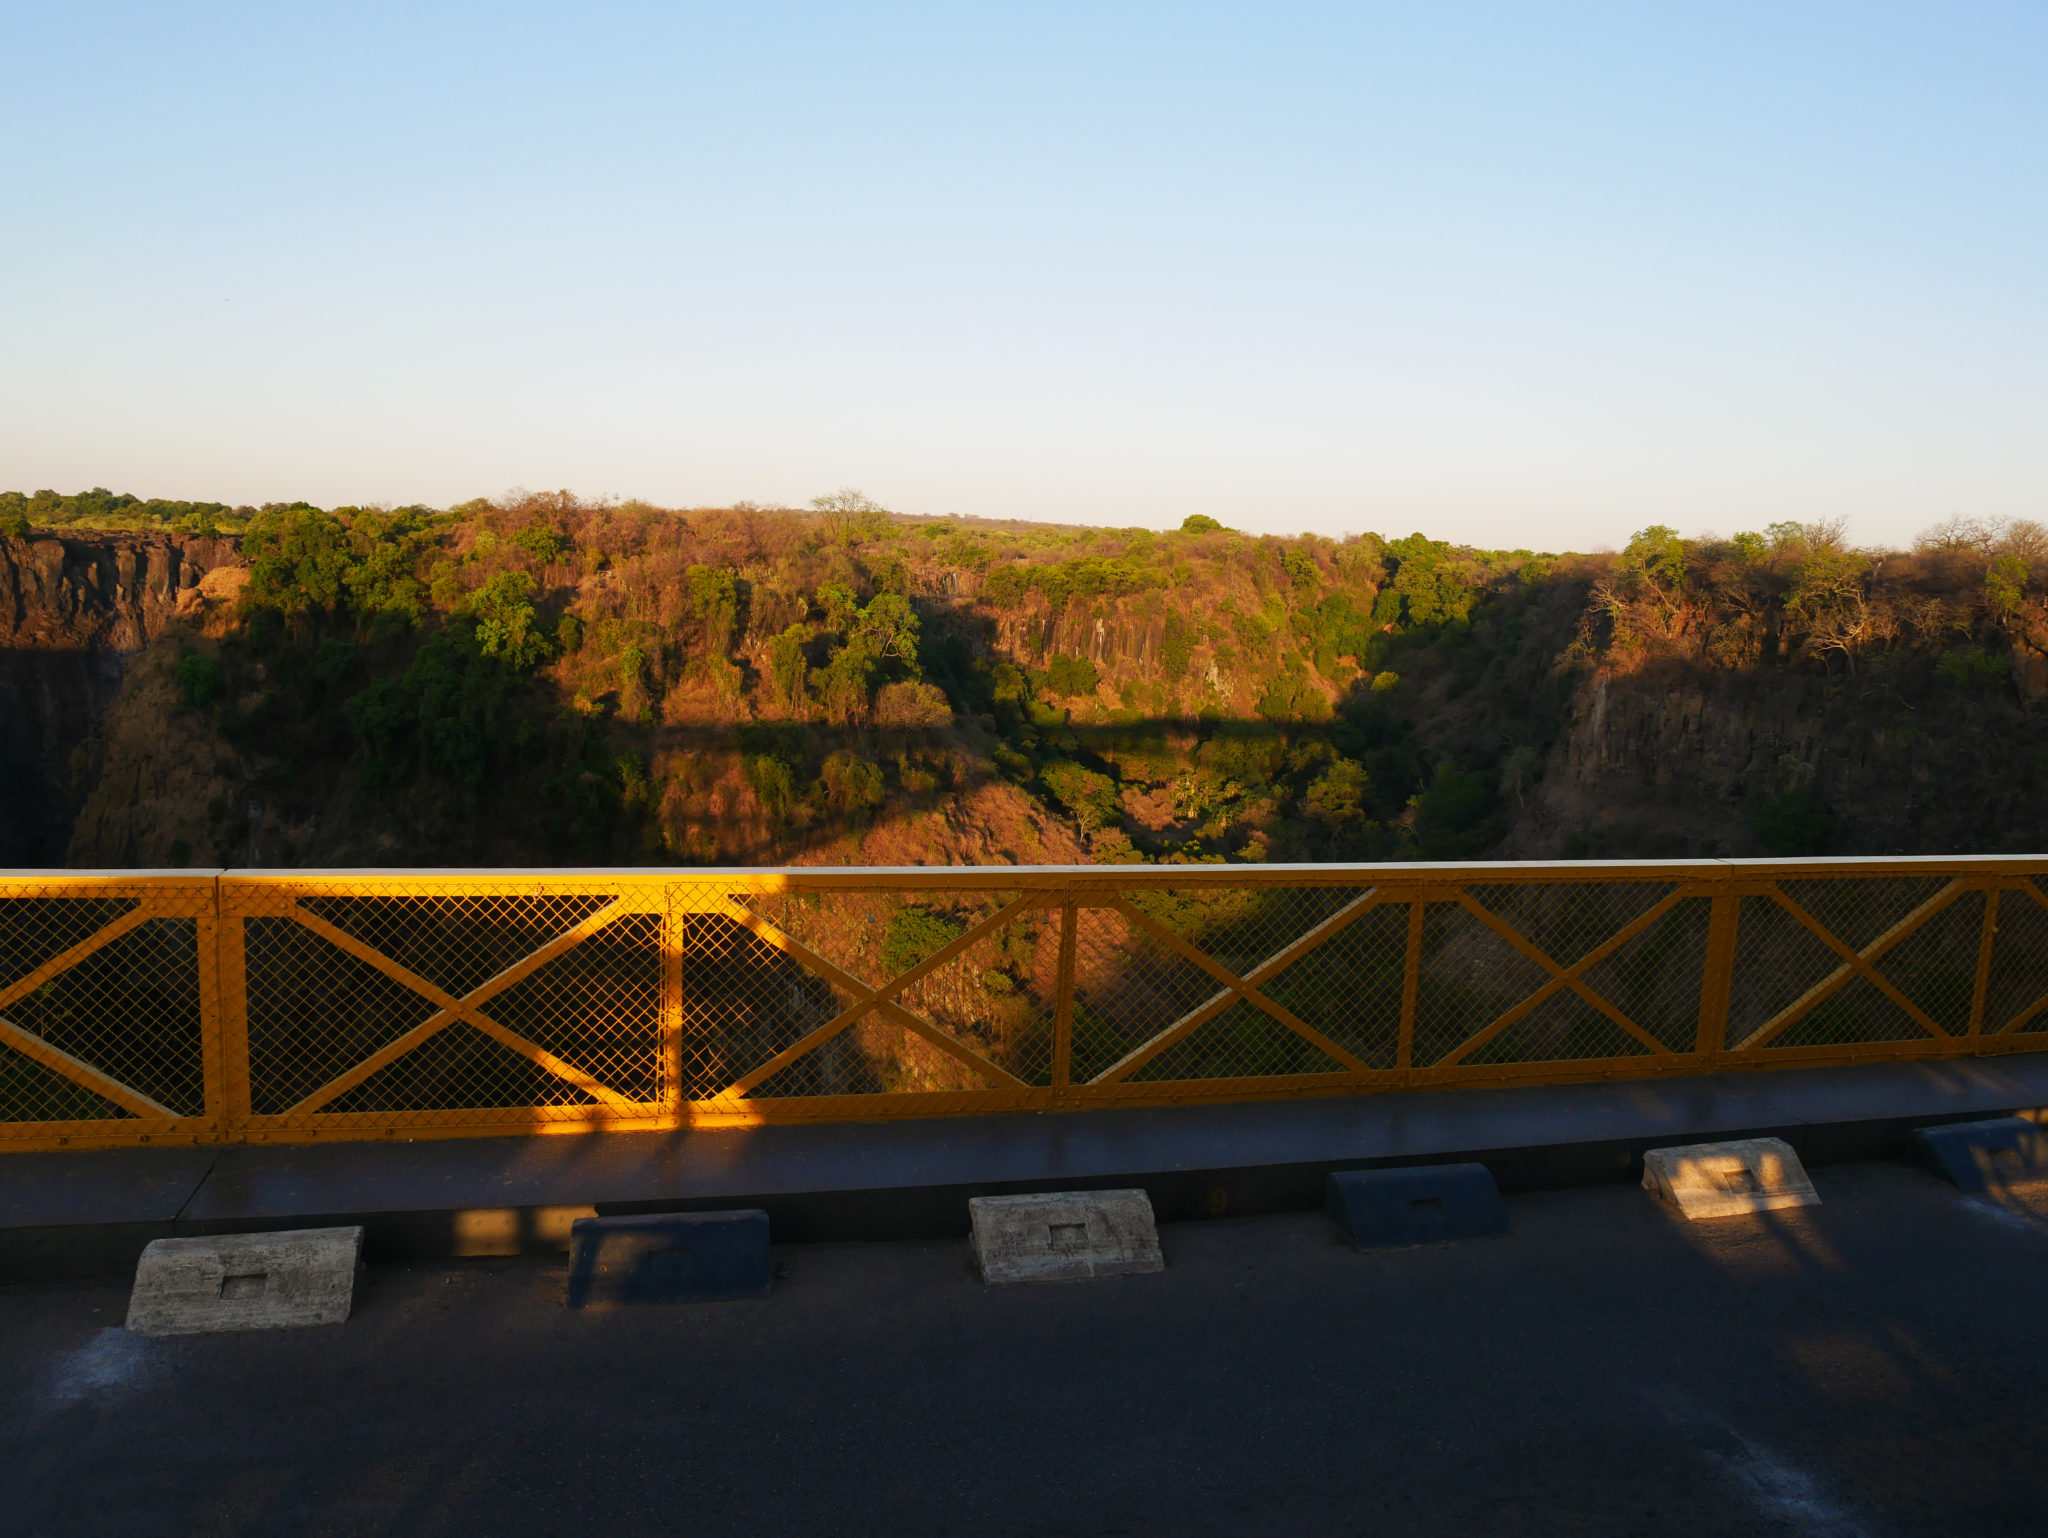 The setting sun casts a shadow of the Victoria Falls Bridge on the gorge